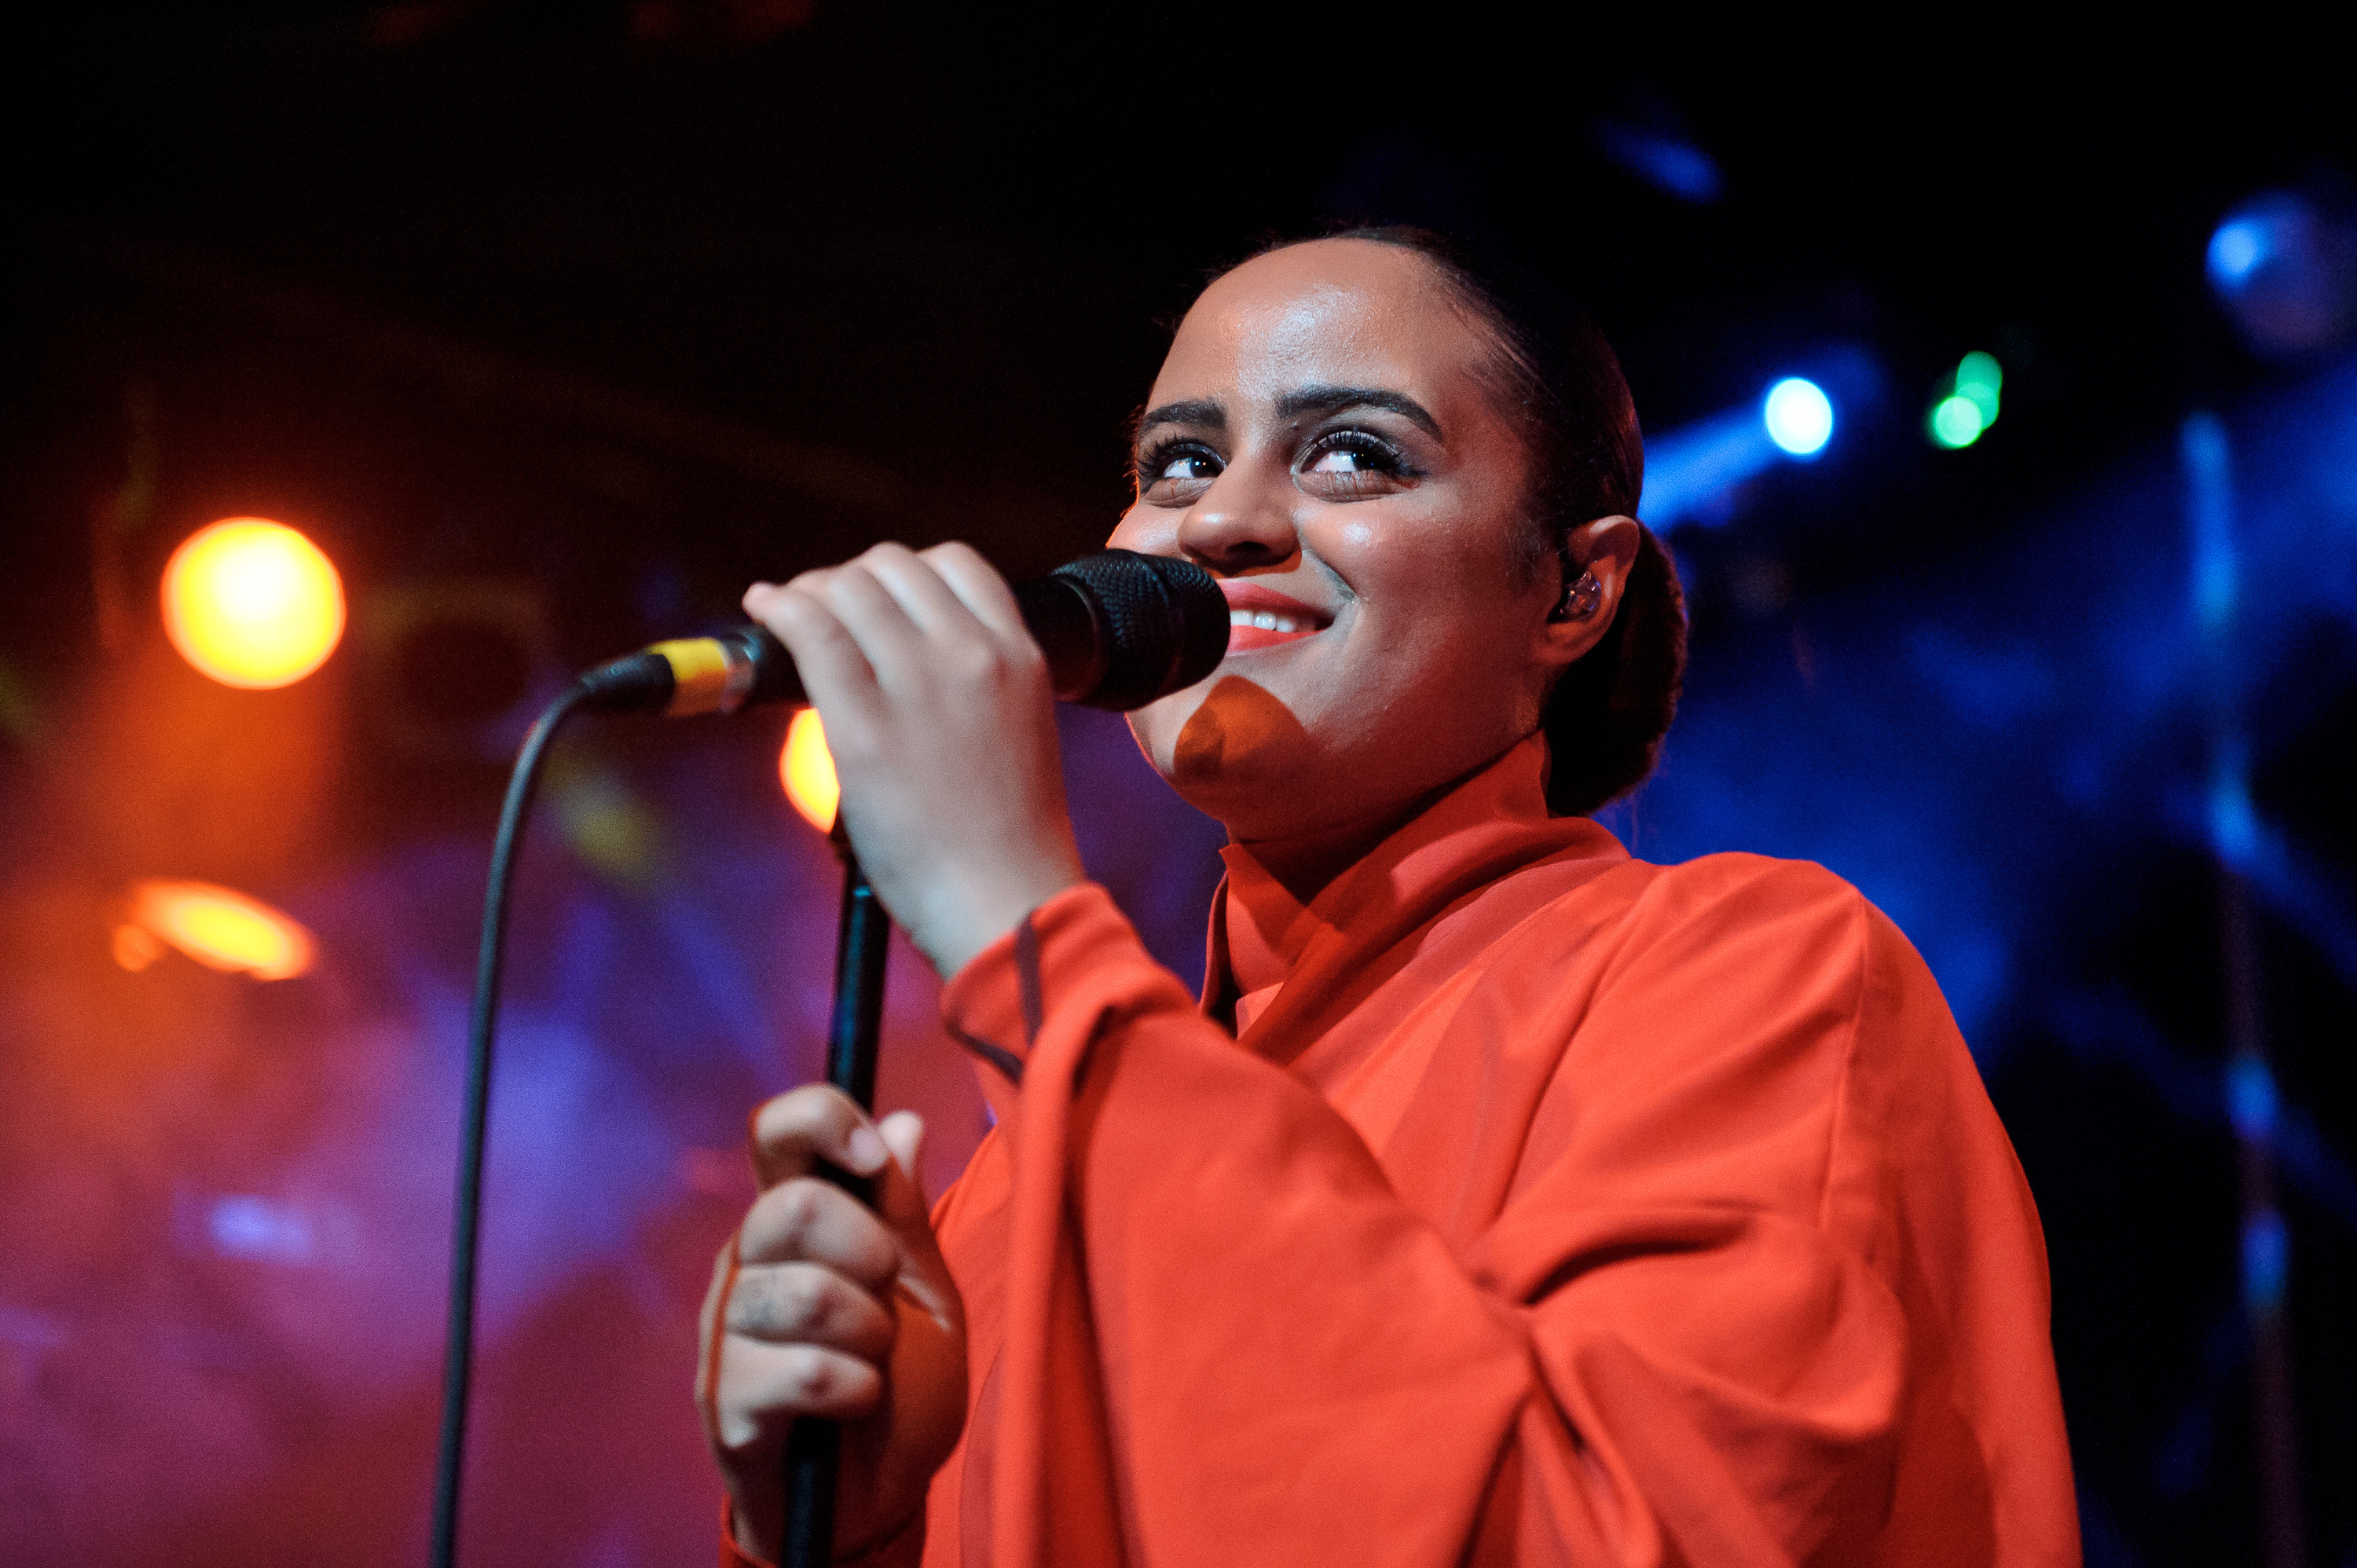 Seinabo Sey performs at Scala on May 20, 2015 in London, England. (Joseph Okpako—Getty Images)